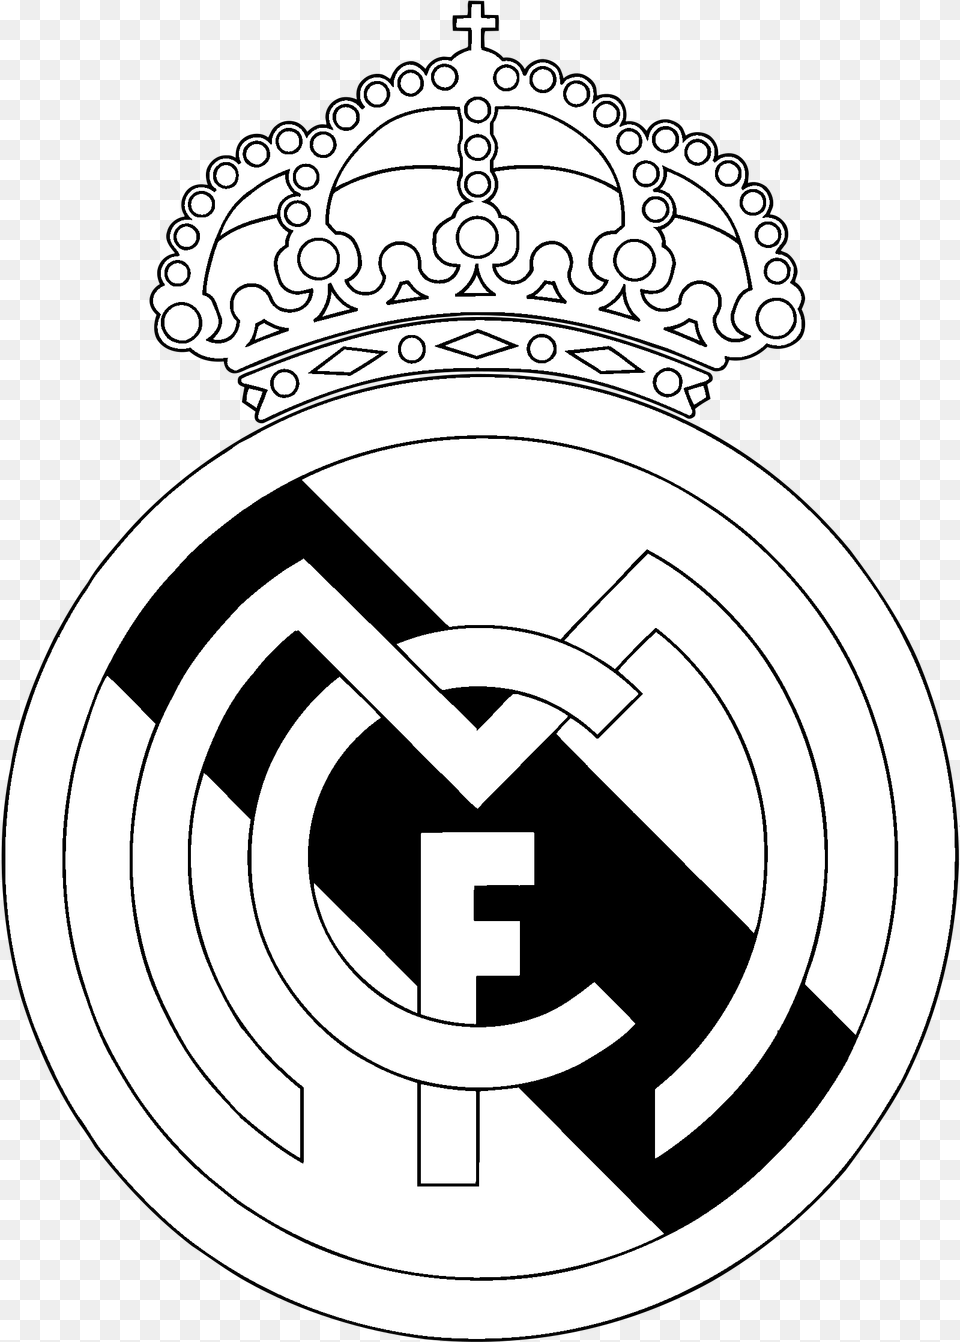 Real Madrid C F Logo Transparent White Transparent Real Madrid Logo, Ammunition, Grenade, Weapon, Accessories Png